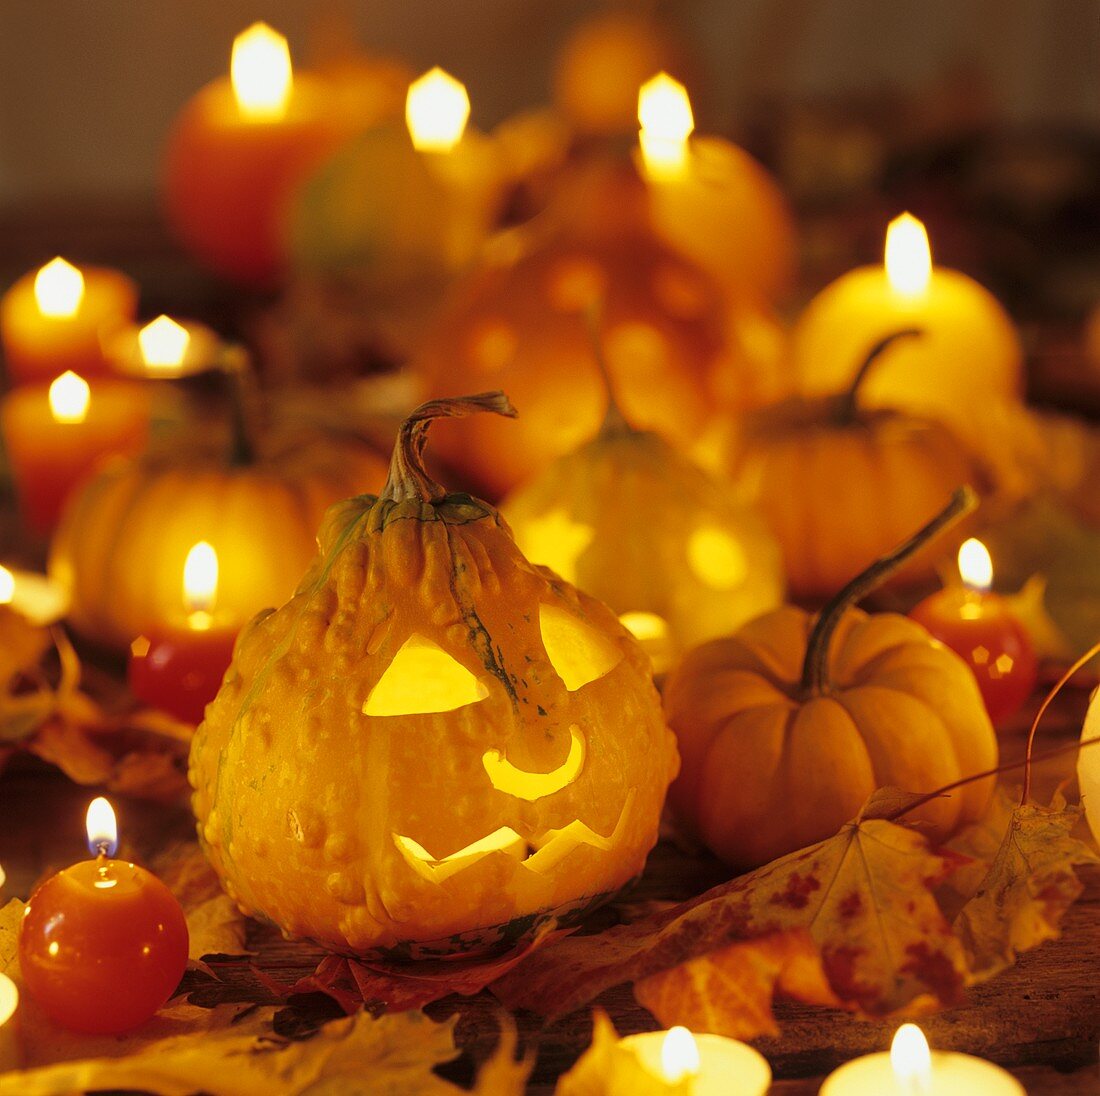 Several pumpkins and candles for Halloween